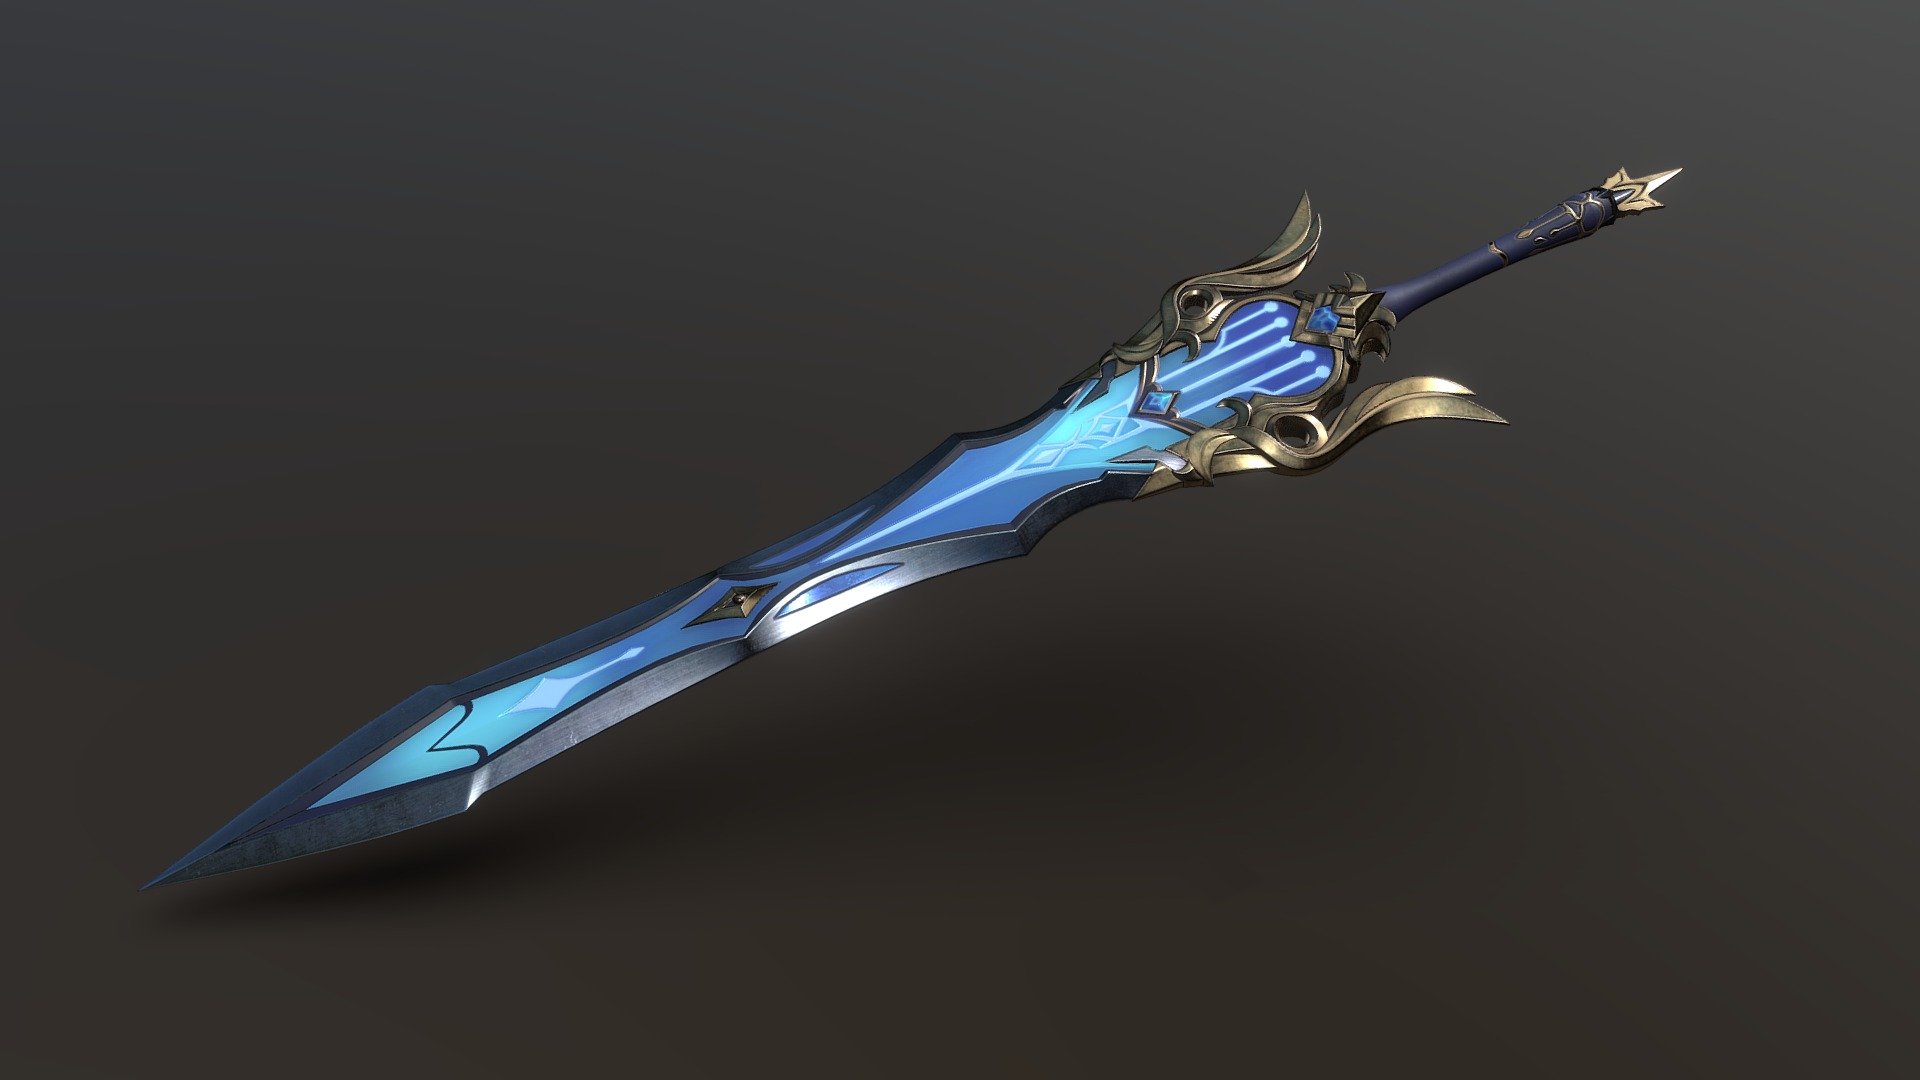 Song of Broken Pines, a claymroe from Genshin Impact, remodeled with PBR material 3d model